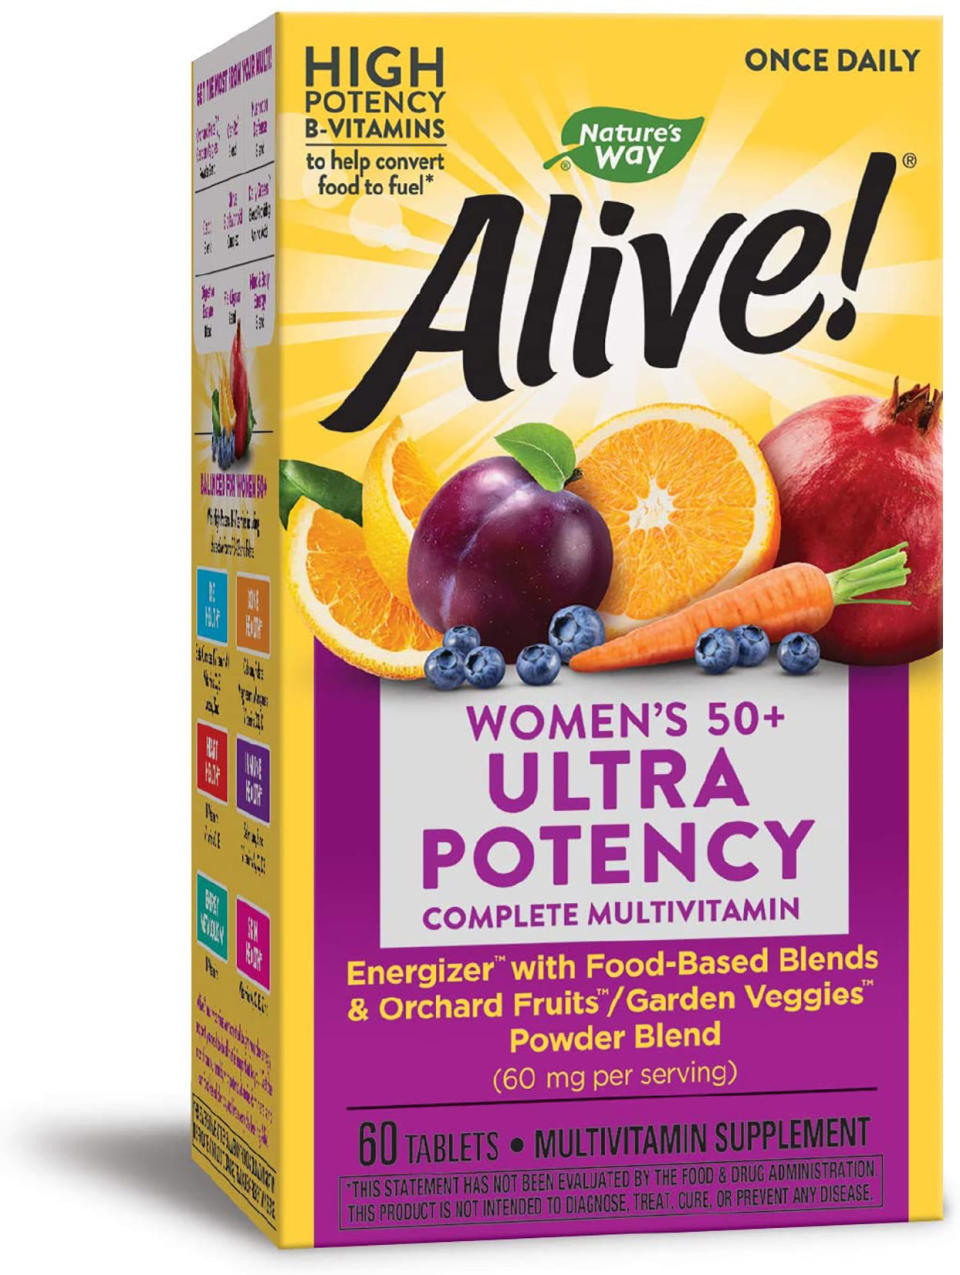 Nature's Way Alive! Once Daily Women’s 50+